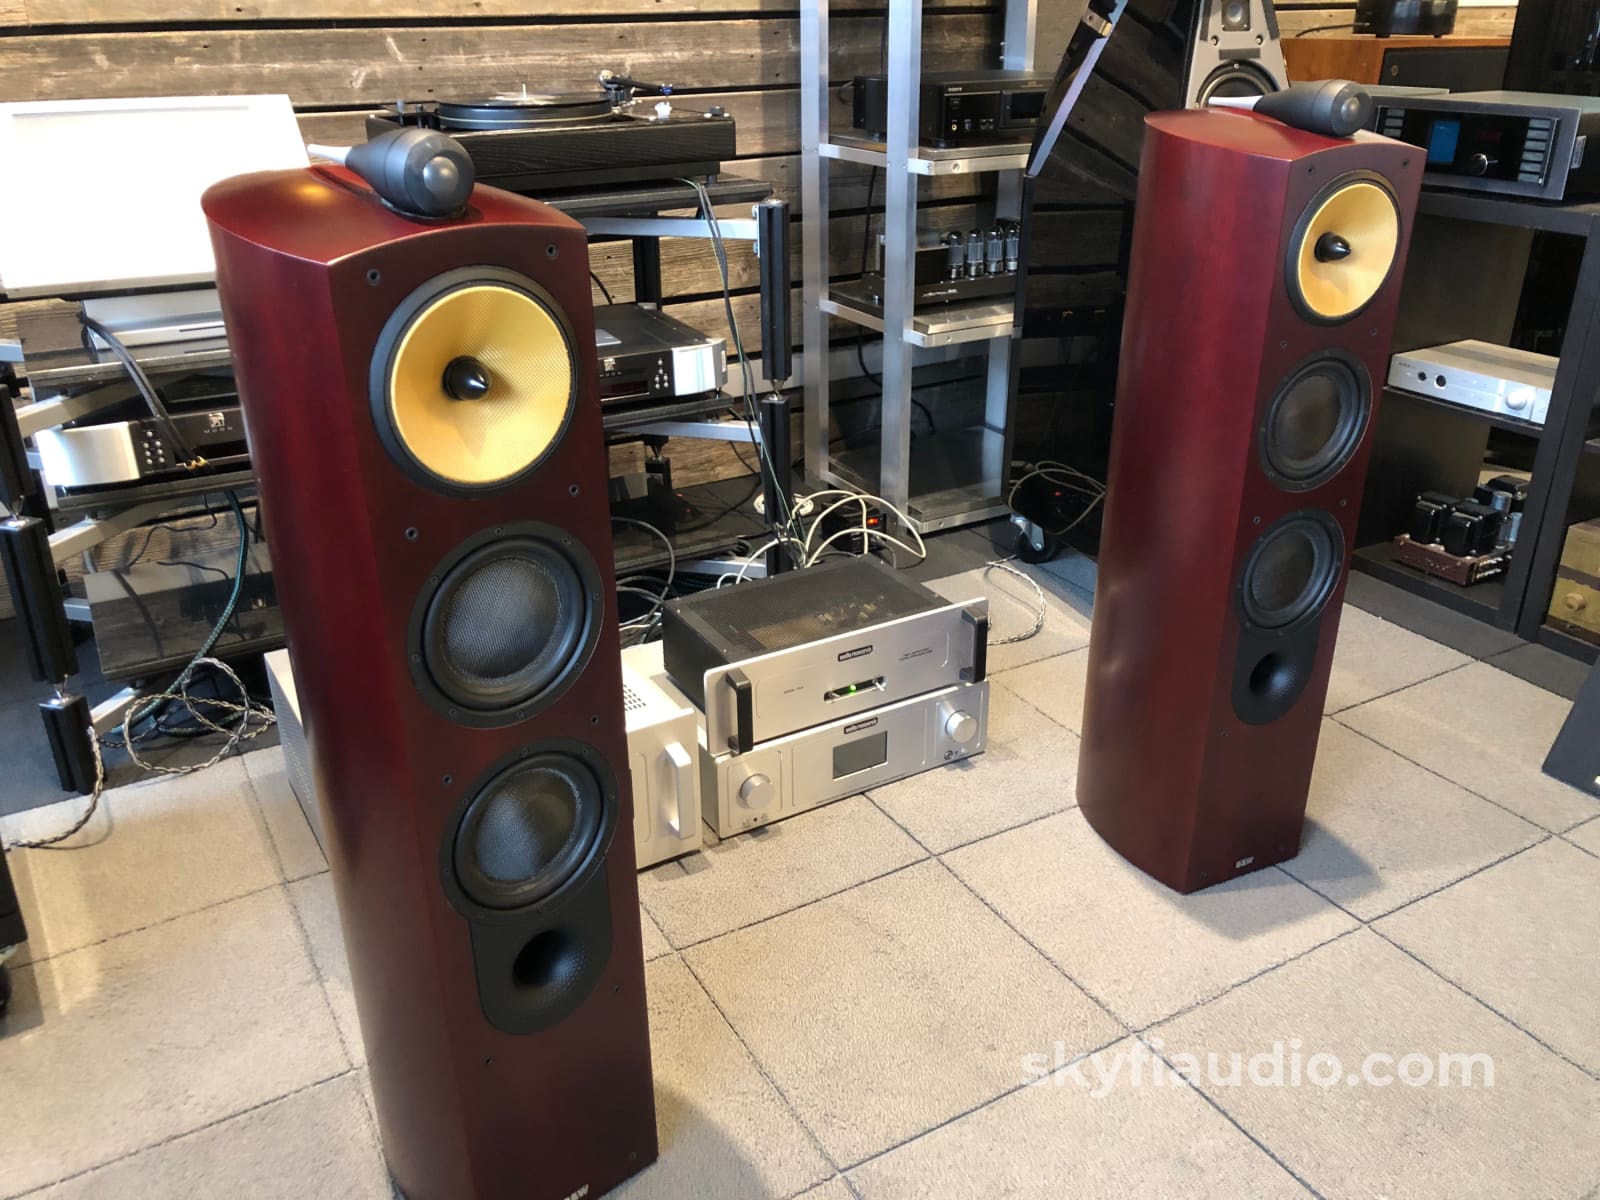 B&W (Bowers & Wilkins) Nautilus 804 Floorstanding Speakers - Gorgeous Red Stained Cherrywood